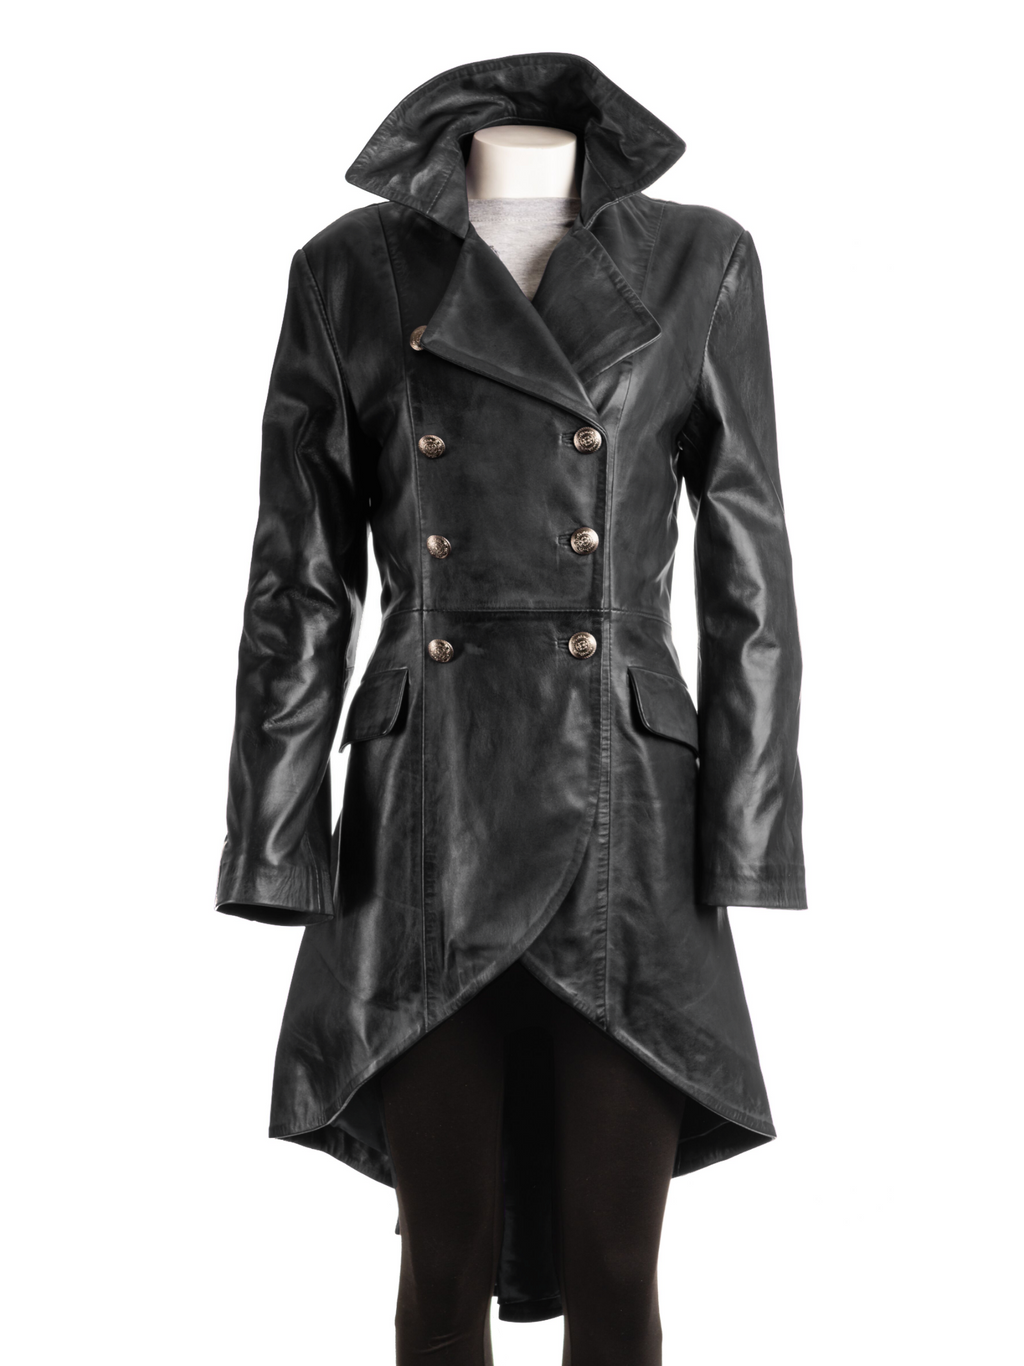 Ladies Black Leather Dip Hem Double Breasted Edwardian Military Style 3/4 Coat: Alessia